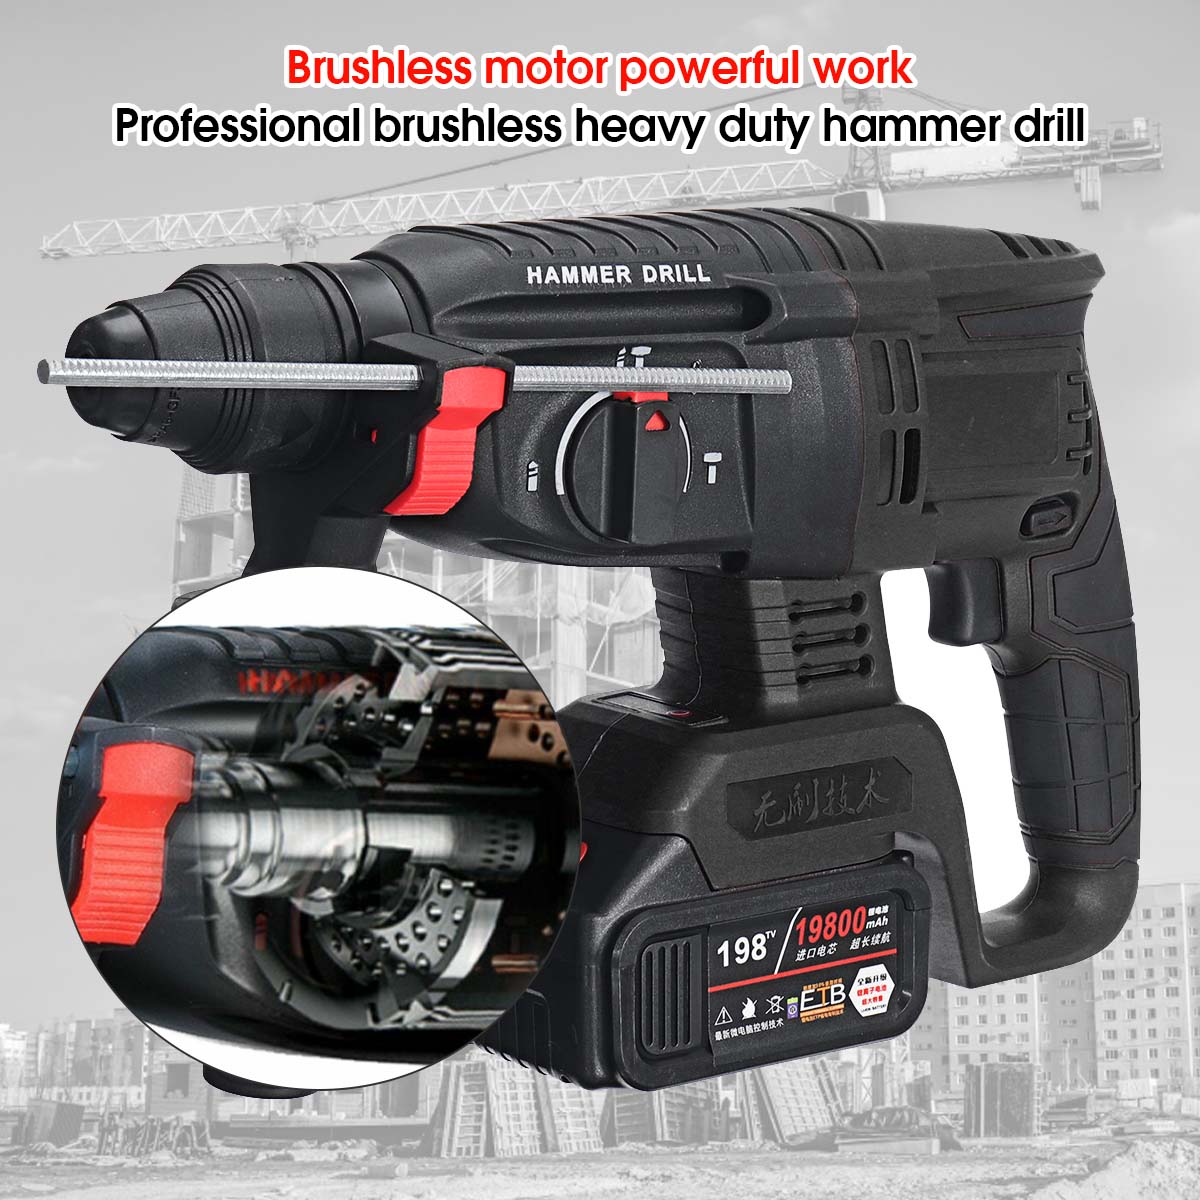 100-240V-21V-Brushless-Electric-Hammer-Heavy-Duty-Electric-Rotary-Hammer-Drill-No-load-Speed-Tool-1744302-2